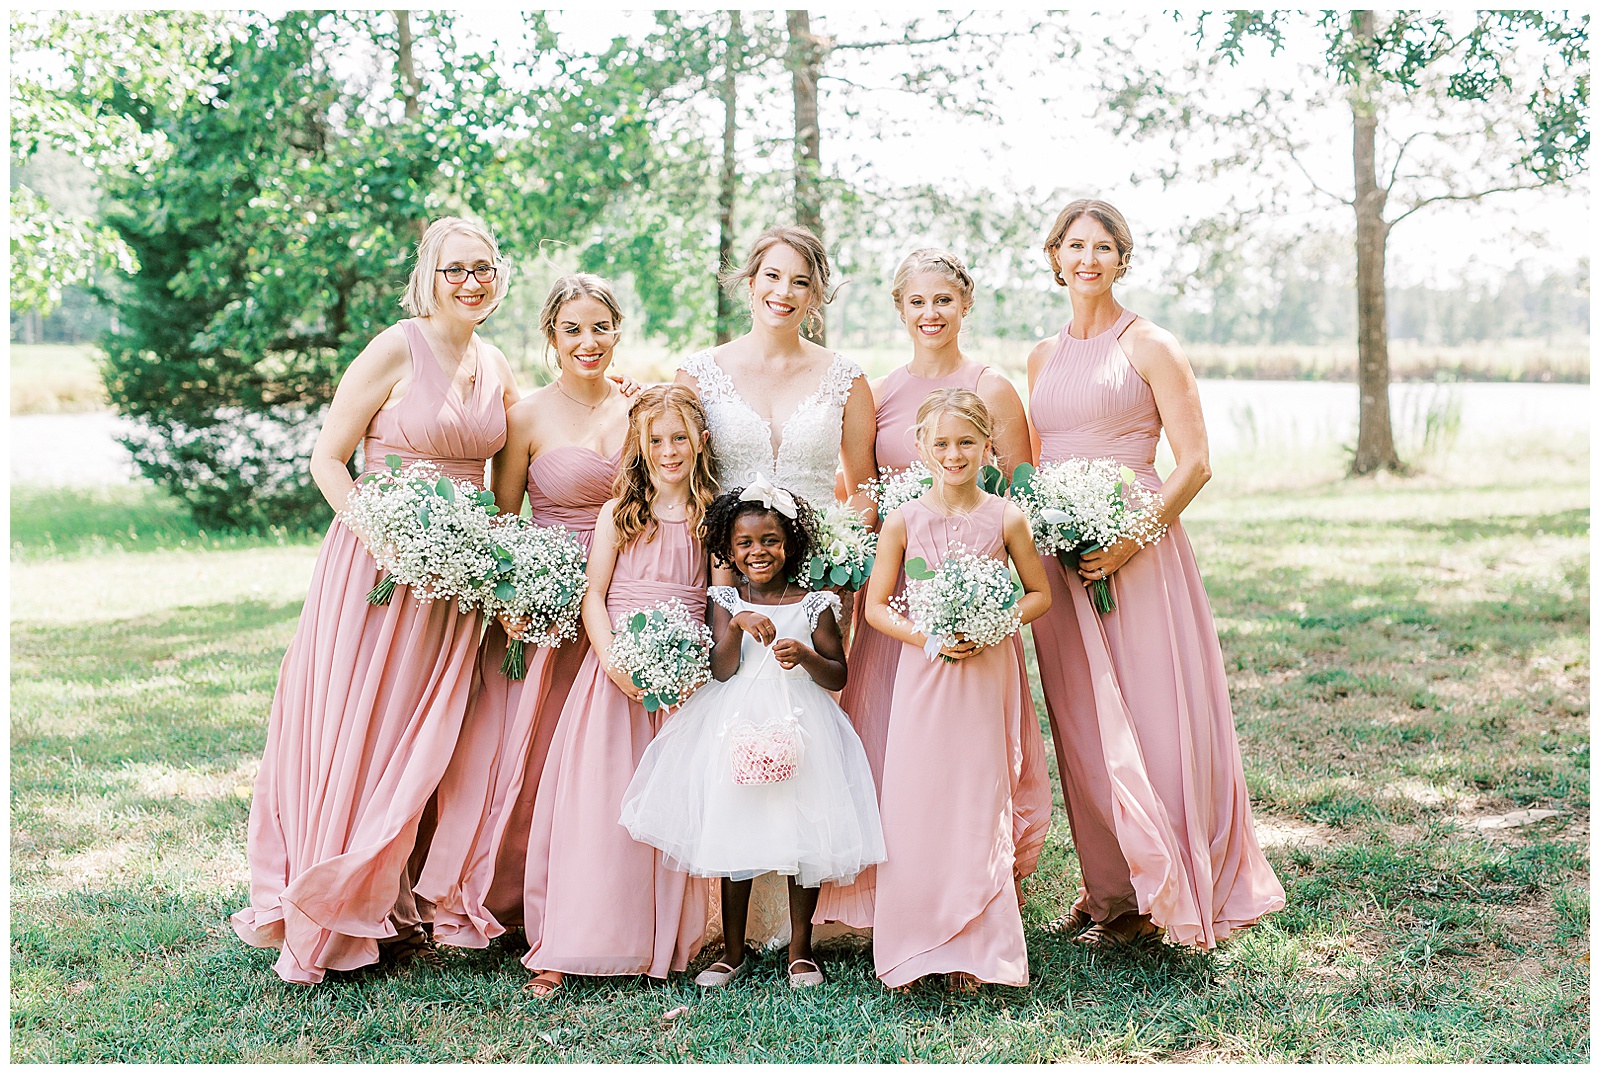 sweet pink bride tribe portraits for outdoor summer wedding